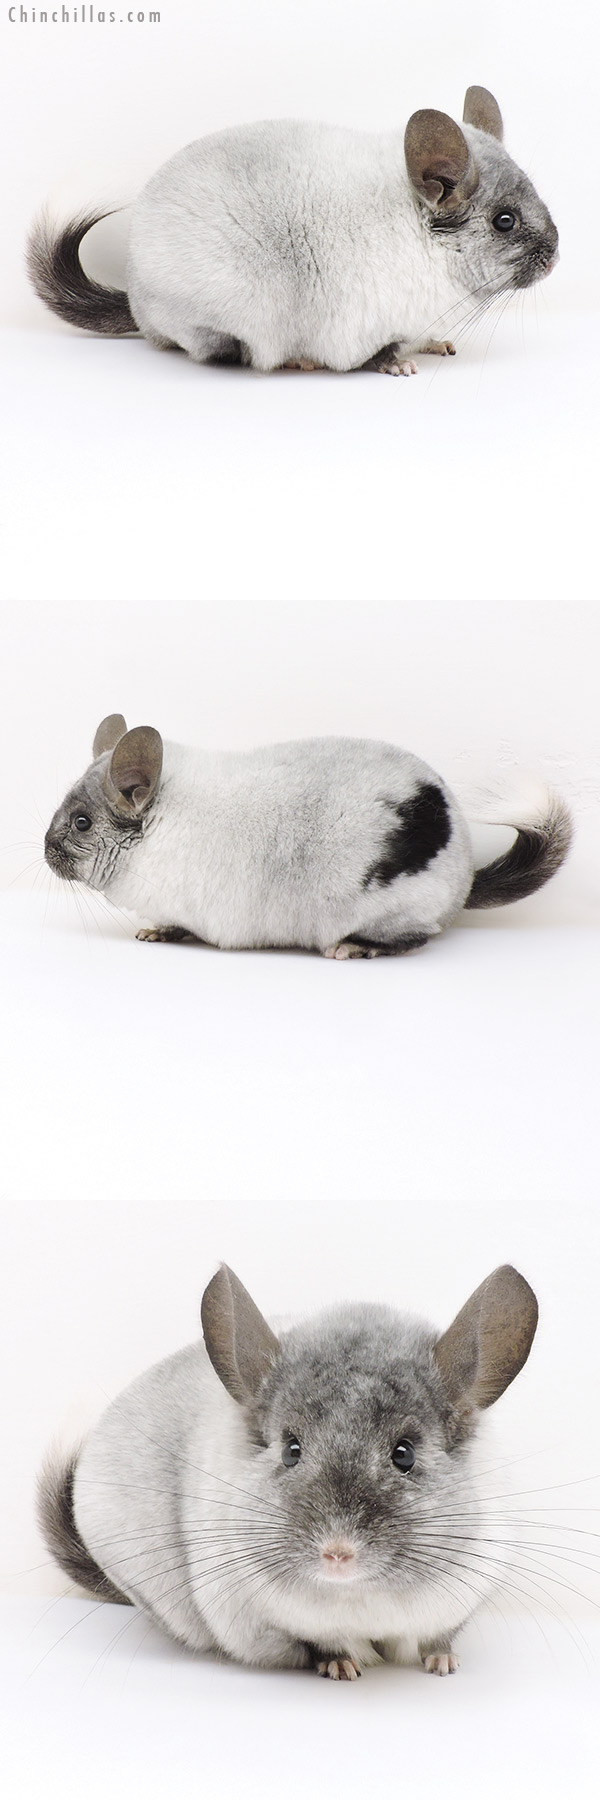 Chinchilla or related item offered for sale or export on Chinchillas.com - 17168 Large Herd Improvement Quality Ebony & White Mosaic Male Chinchilla with Body Spot